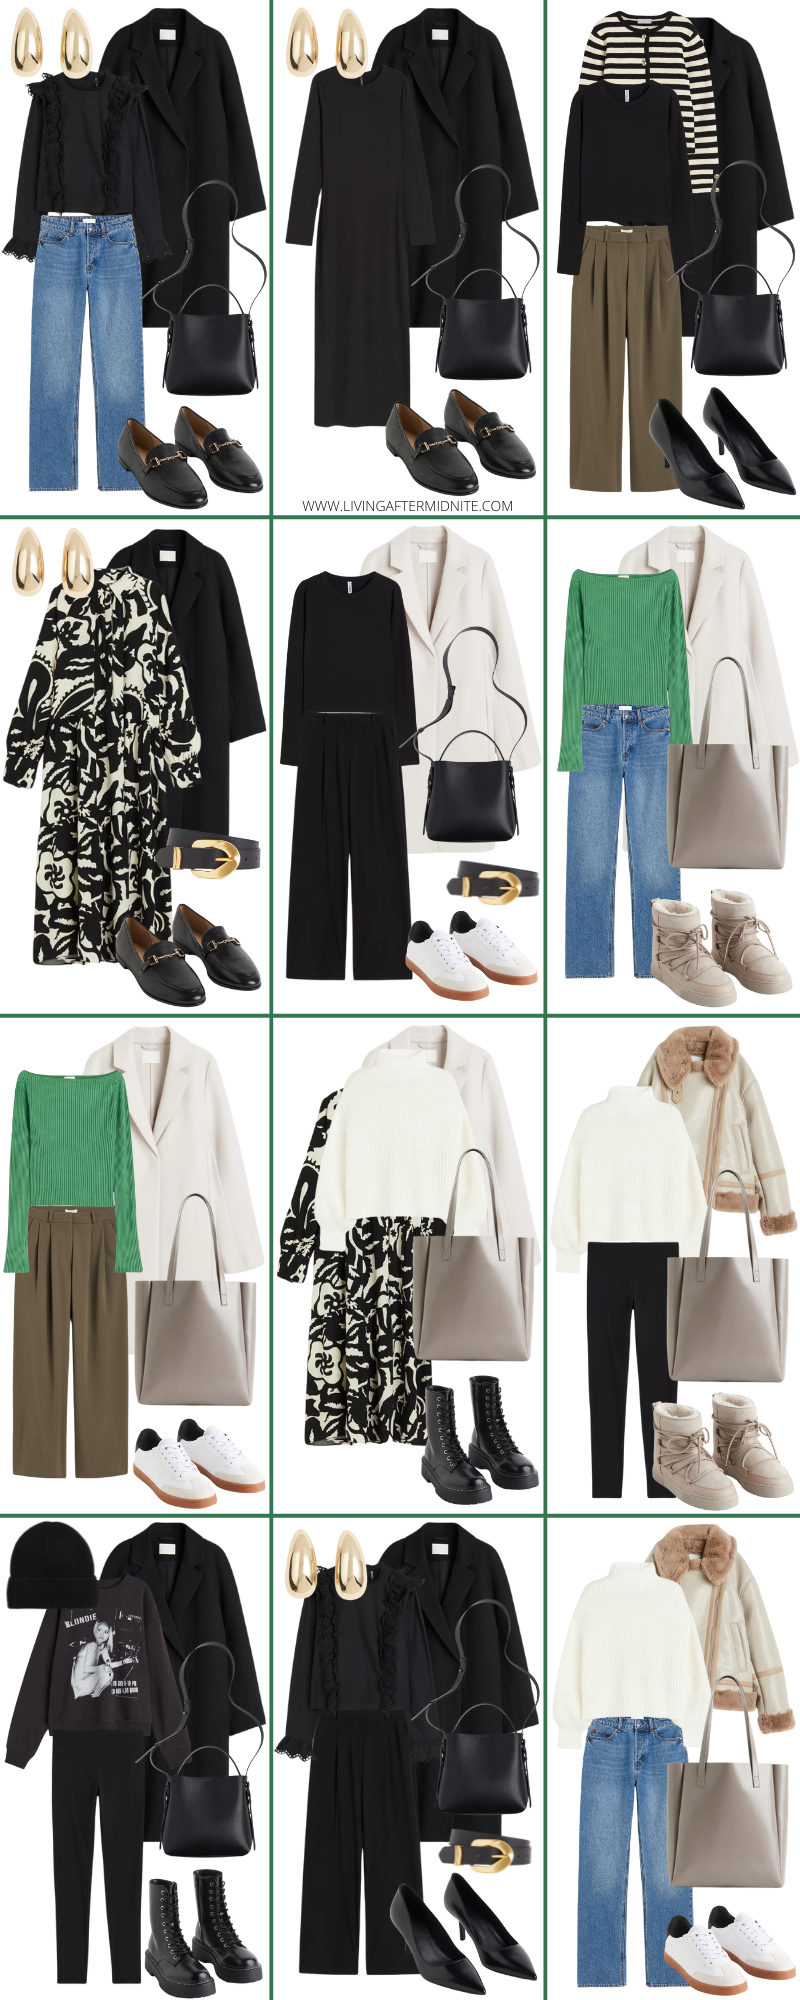 Winter Capsule Wardrobe HD  Must Have Pieces for Winter